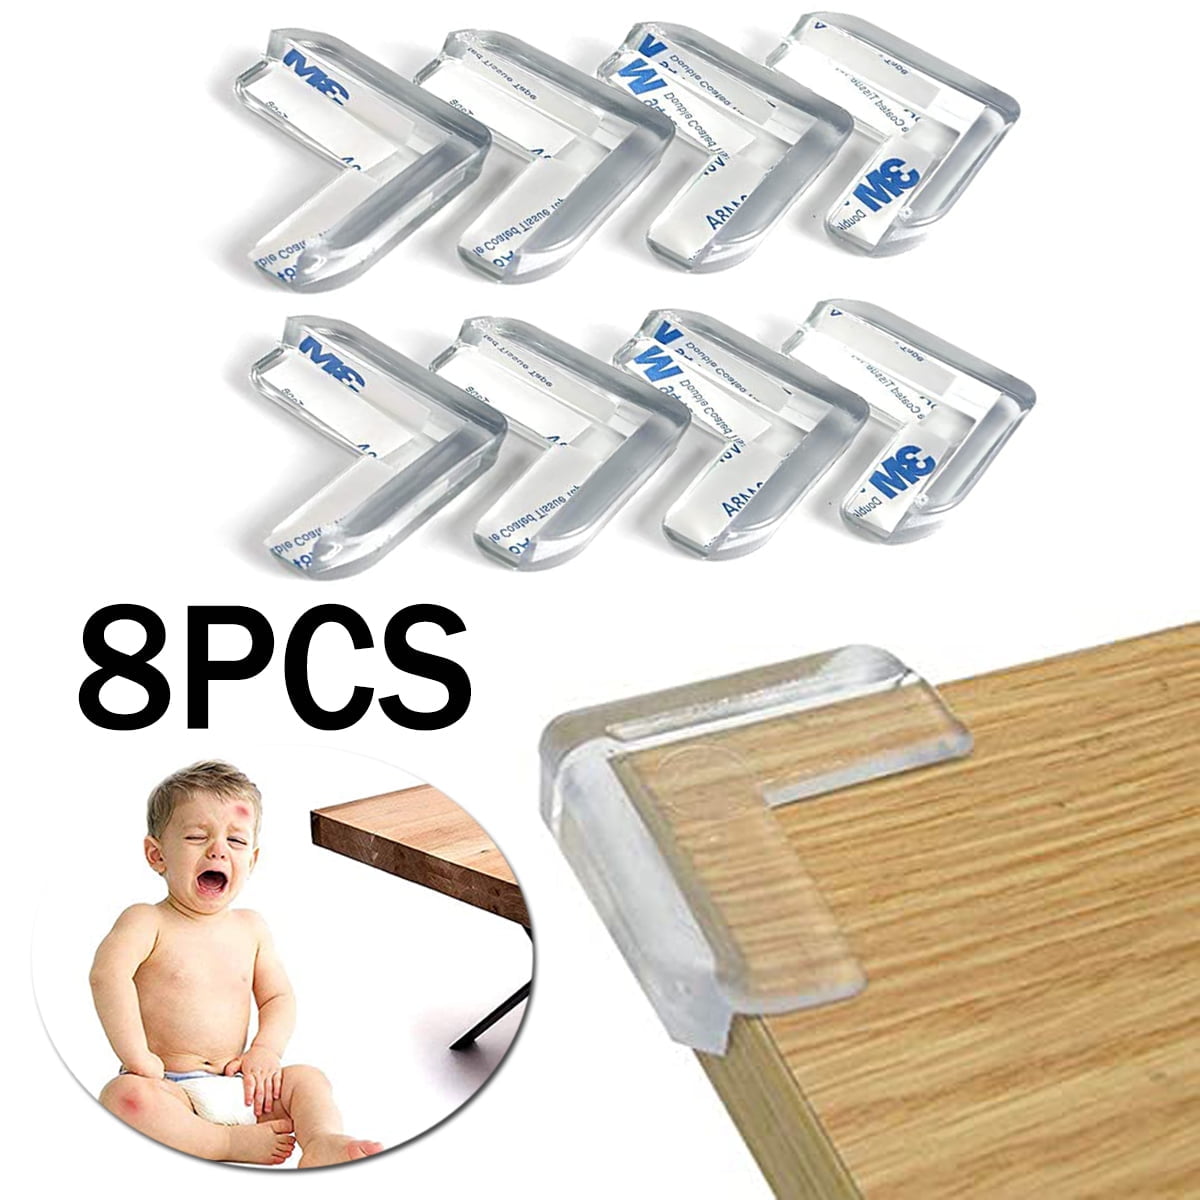 Jool Baby Products Corner Guards (24 Pack) Ultra Clear Table Corner Protector - Long Lasting Pre-Applied Adhesive - Furniture & Edge Bumpers